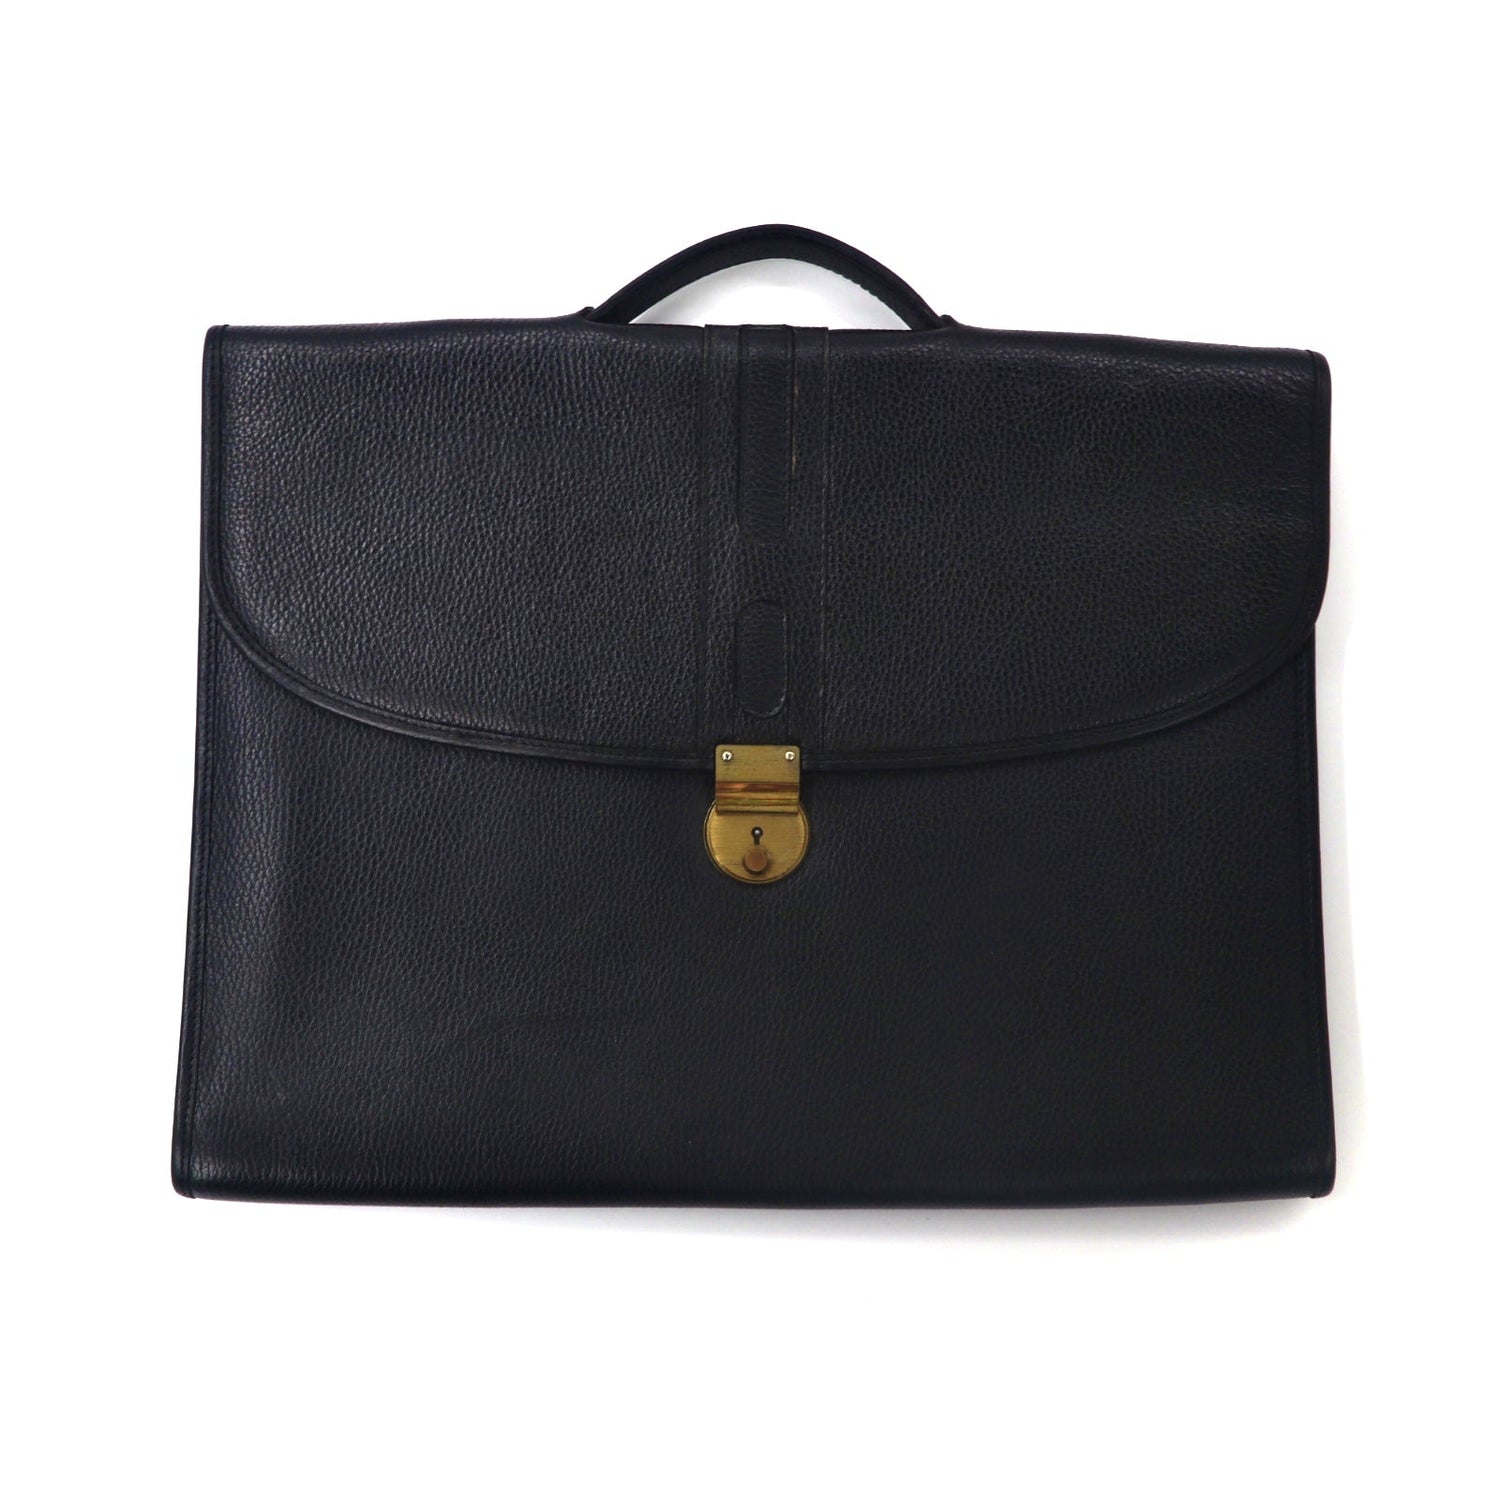 ipam Business Bag Brief Case Black Leather Made in Italy – 日本然 ...